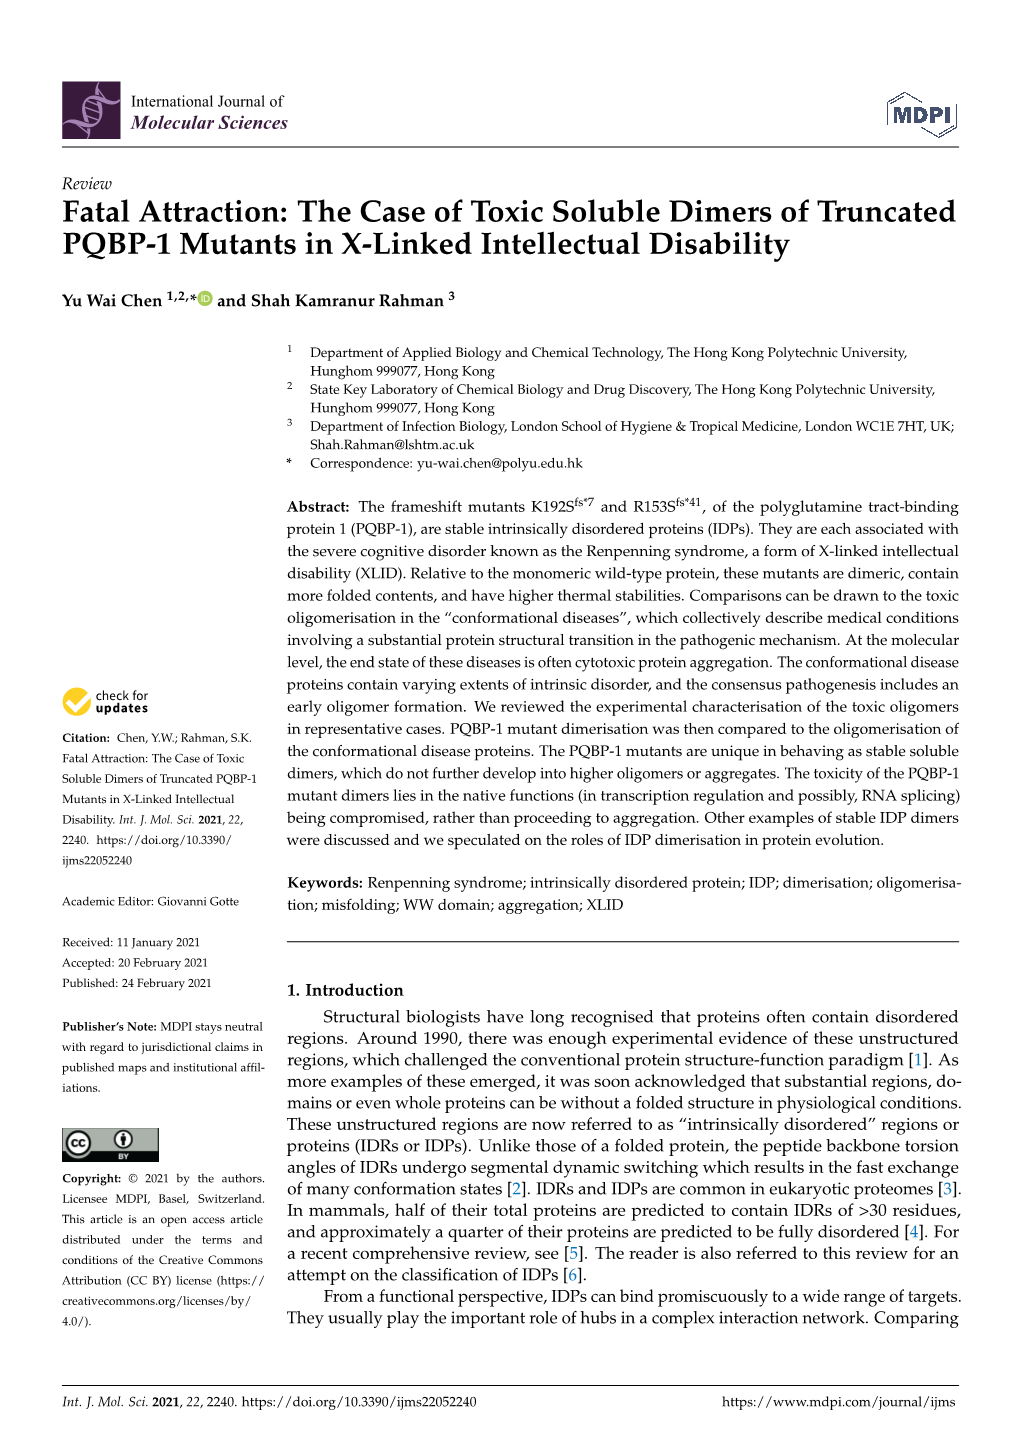 The Case of Toxic Soluble Dimers of Truncated PQBP-1 Mutants in X-Linked Intellectual Disability